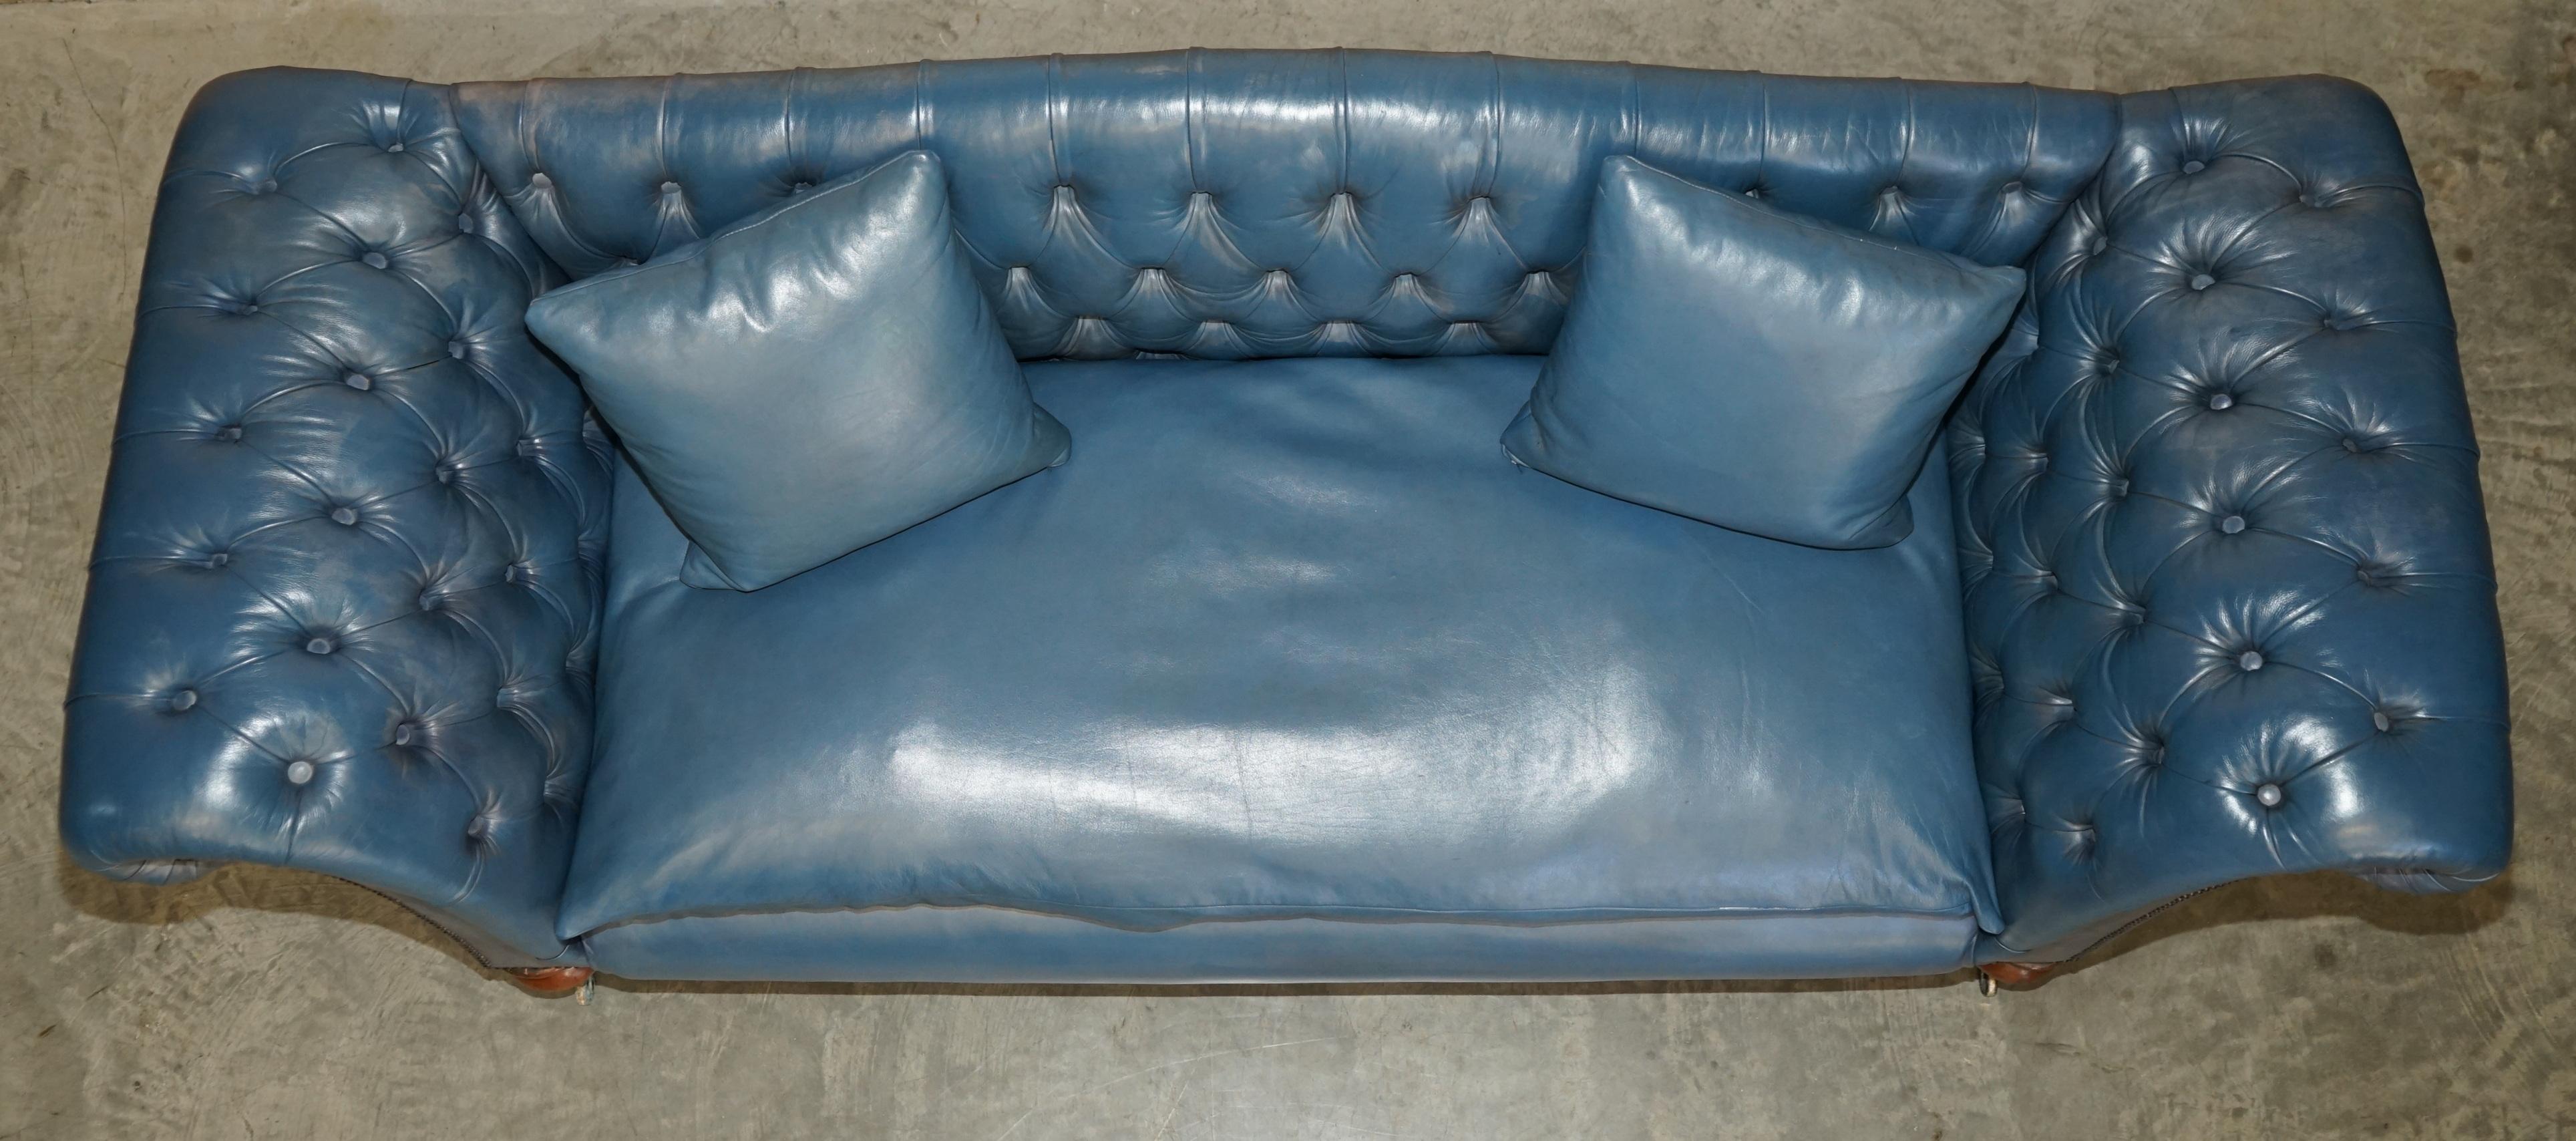 RESTORED WILLIAM IV CIRCA 1830 CHESTERFiELD REGENCY BLUE LEATHER HUMP BACK SOFA For Sale 5